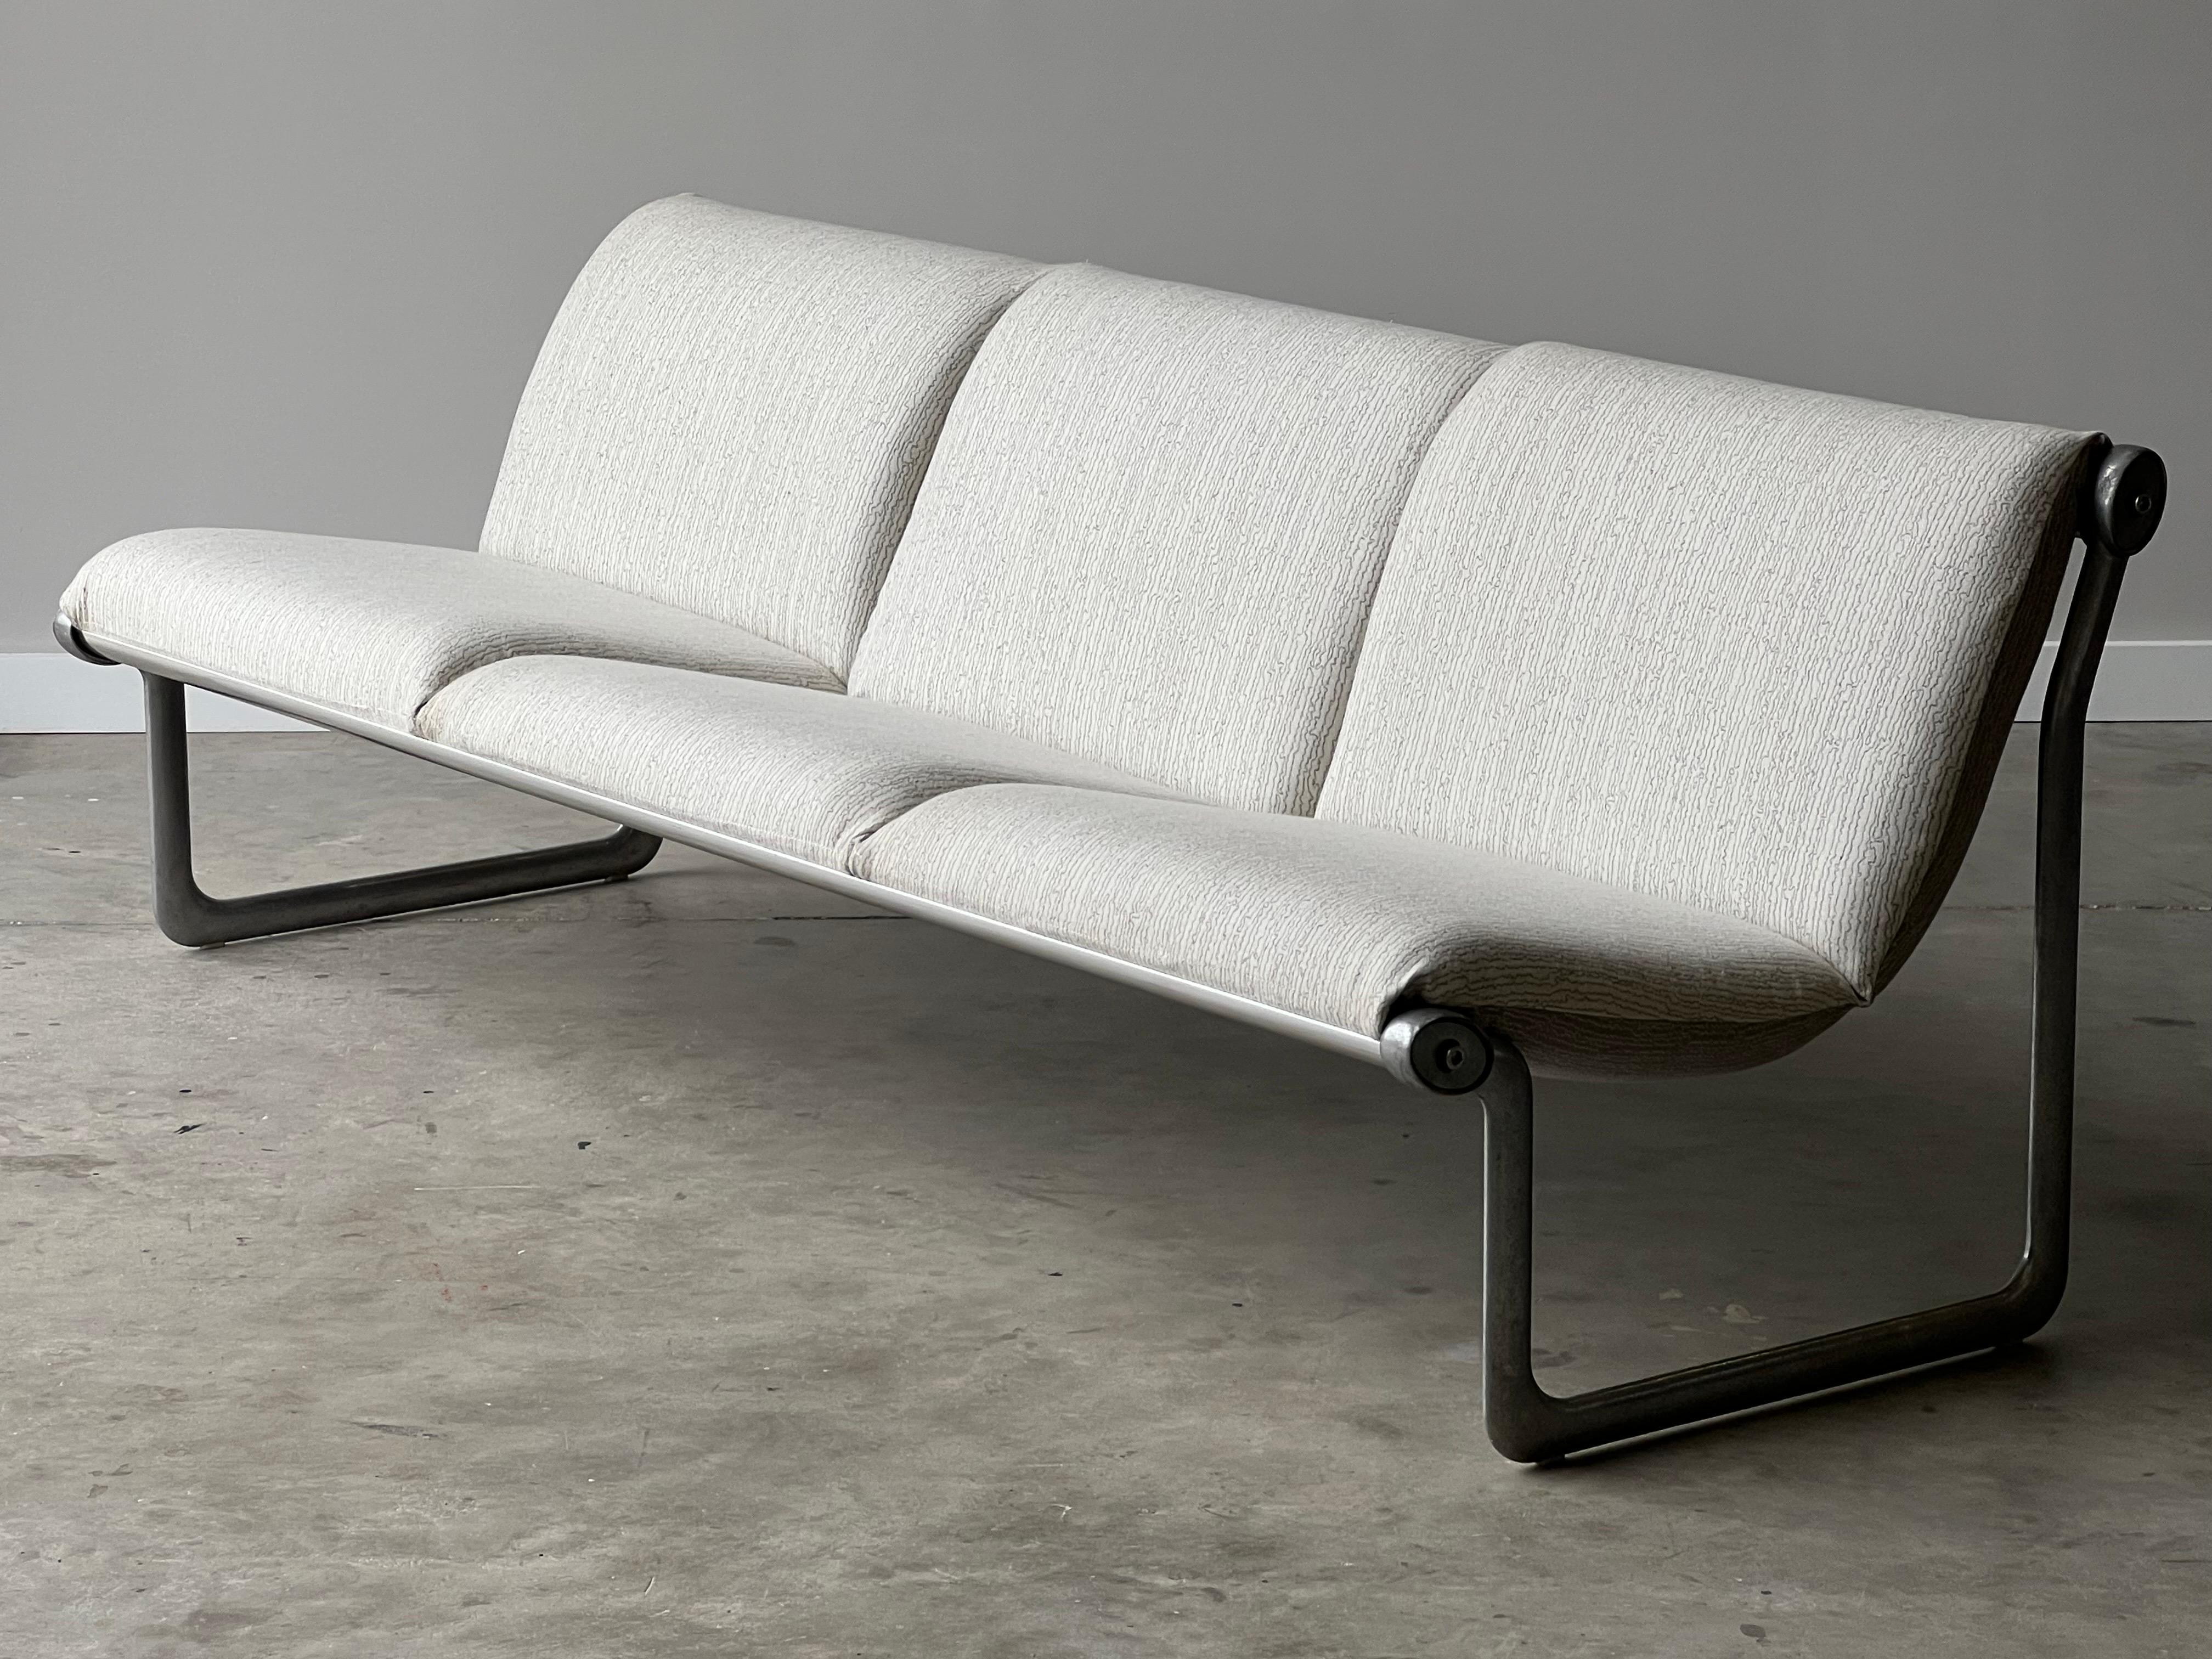 Vintage “Sling” Sofas by Bruce Hannah and Andrew Morrison for Knoll  5